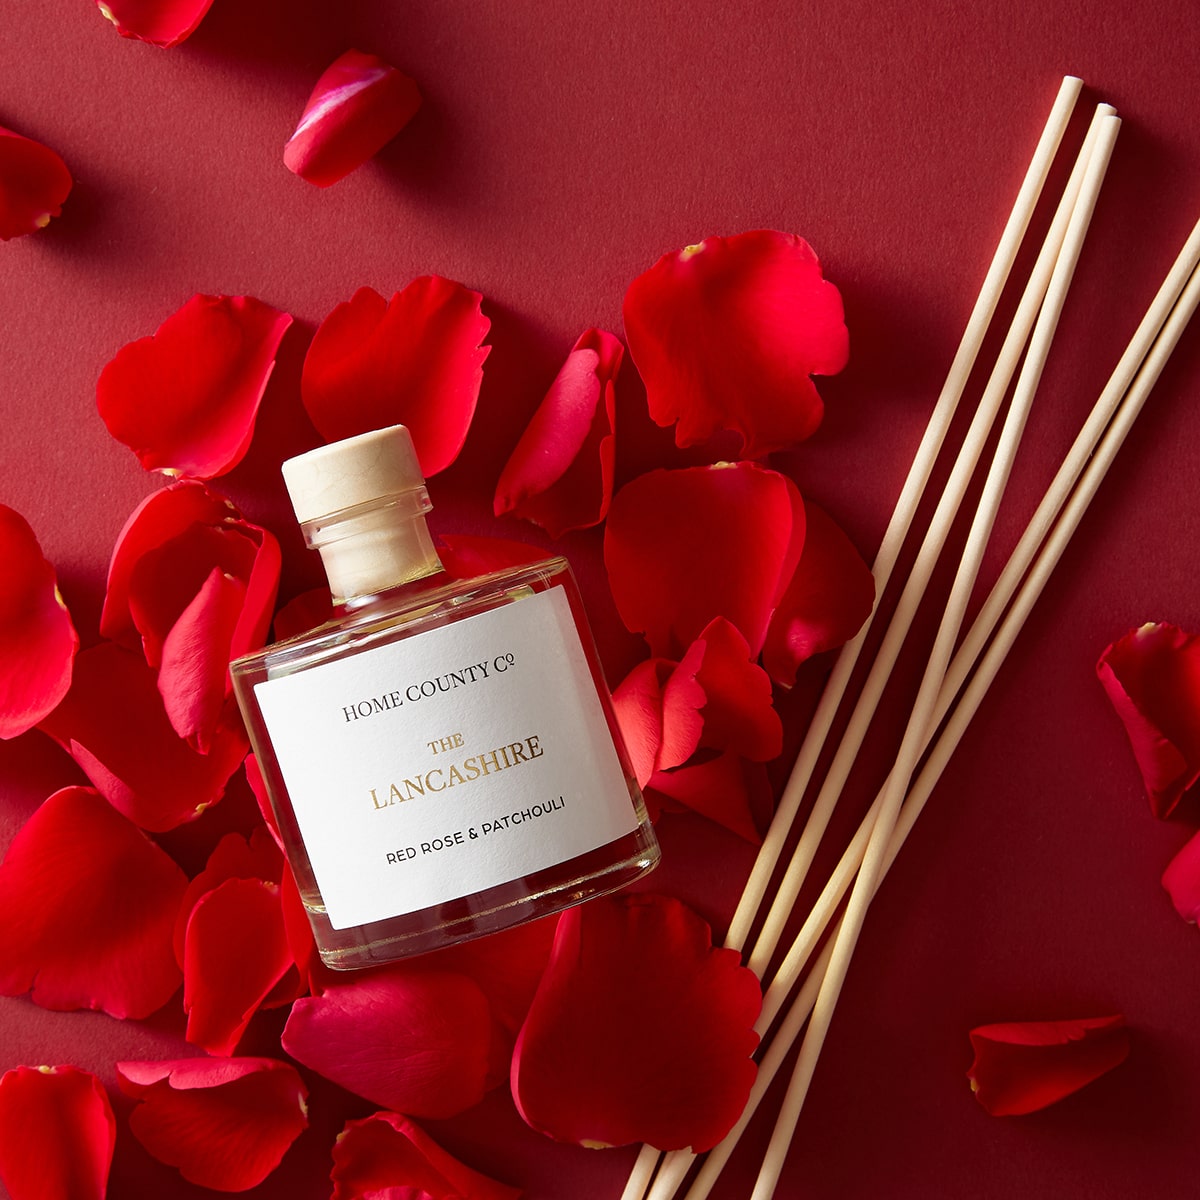 A Lancashire red rose and patchouli reed diffuser is shown with its porex reeds